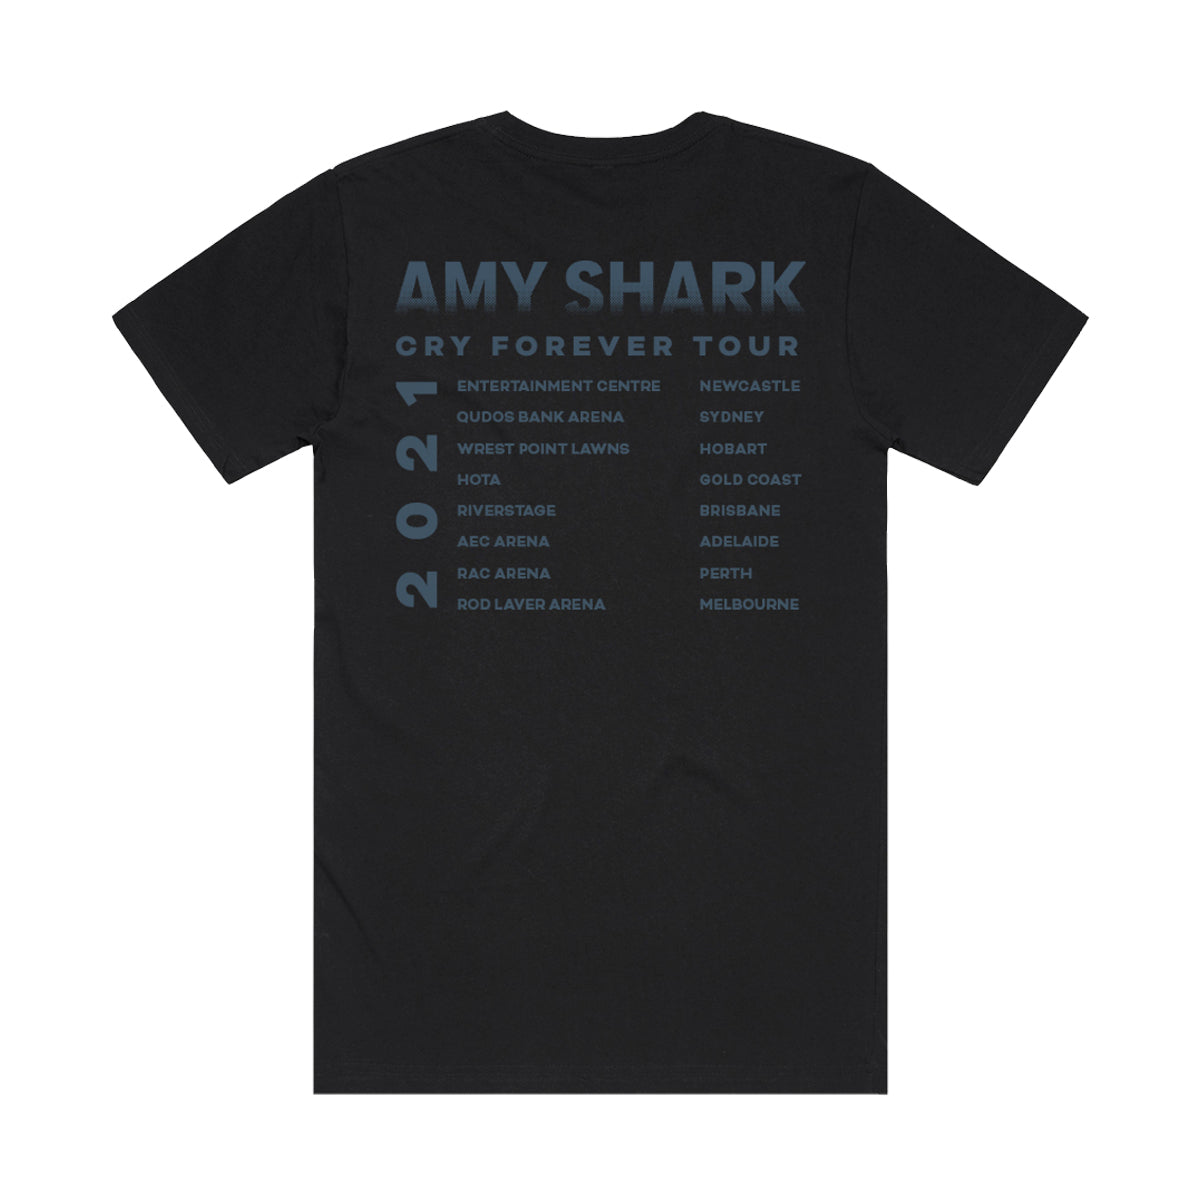 Back of black t-shirt with Amy Shark tour dates in blue